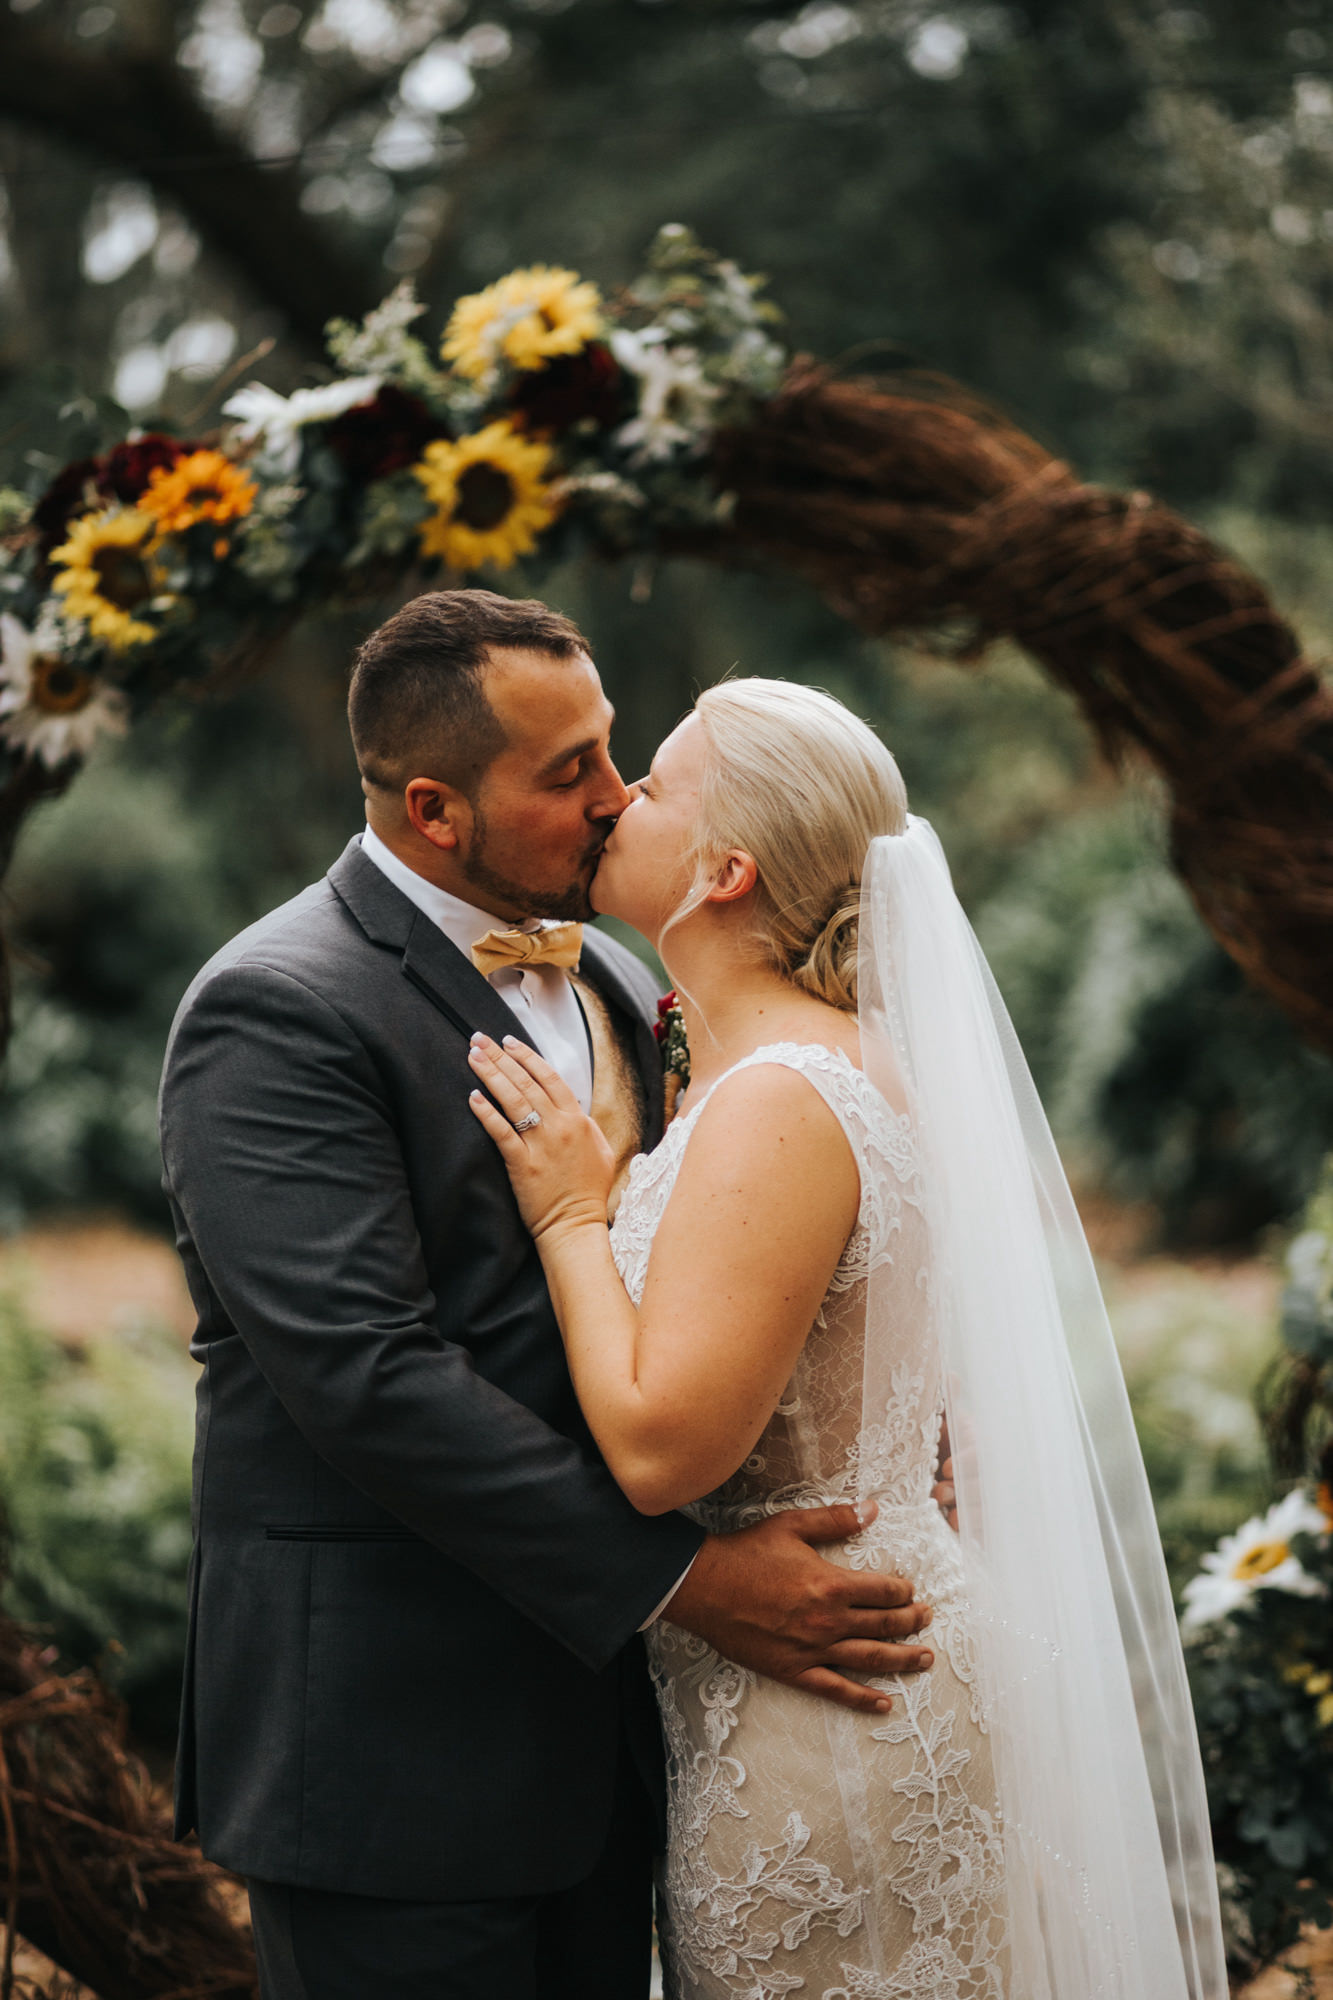 Bride and Groom First Kiss during Rustic Dover Burgundy and Yellow Sunflower Outdoor Wedding Ceremony with Round Grapevine Branch Arch | V Neck Champagne Lace Bridal Gown Wedding Dress from Sarasota Dress Shop Truly Forever Bridal | Groom in Classic Charcoal Grey Gray Suit Tux with Sunflower Boutonniere